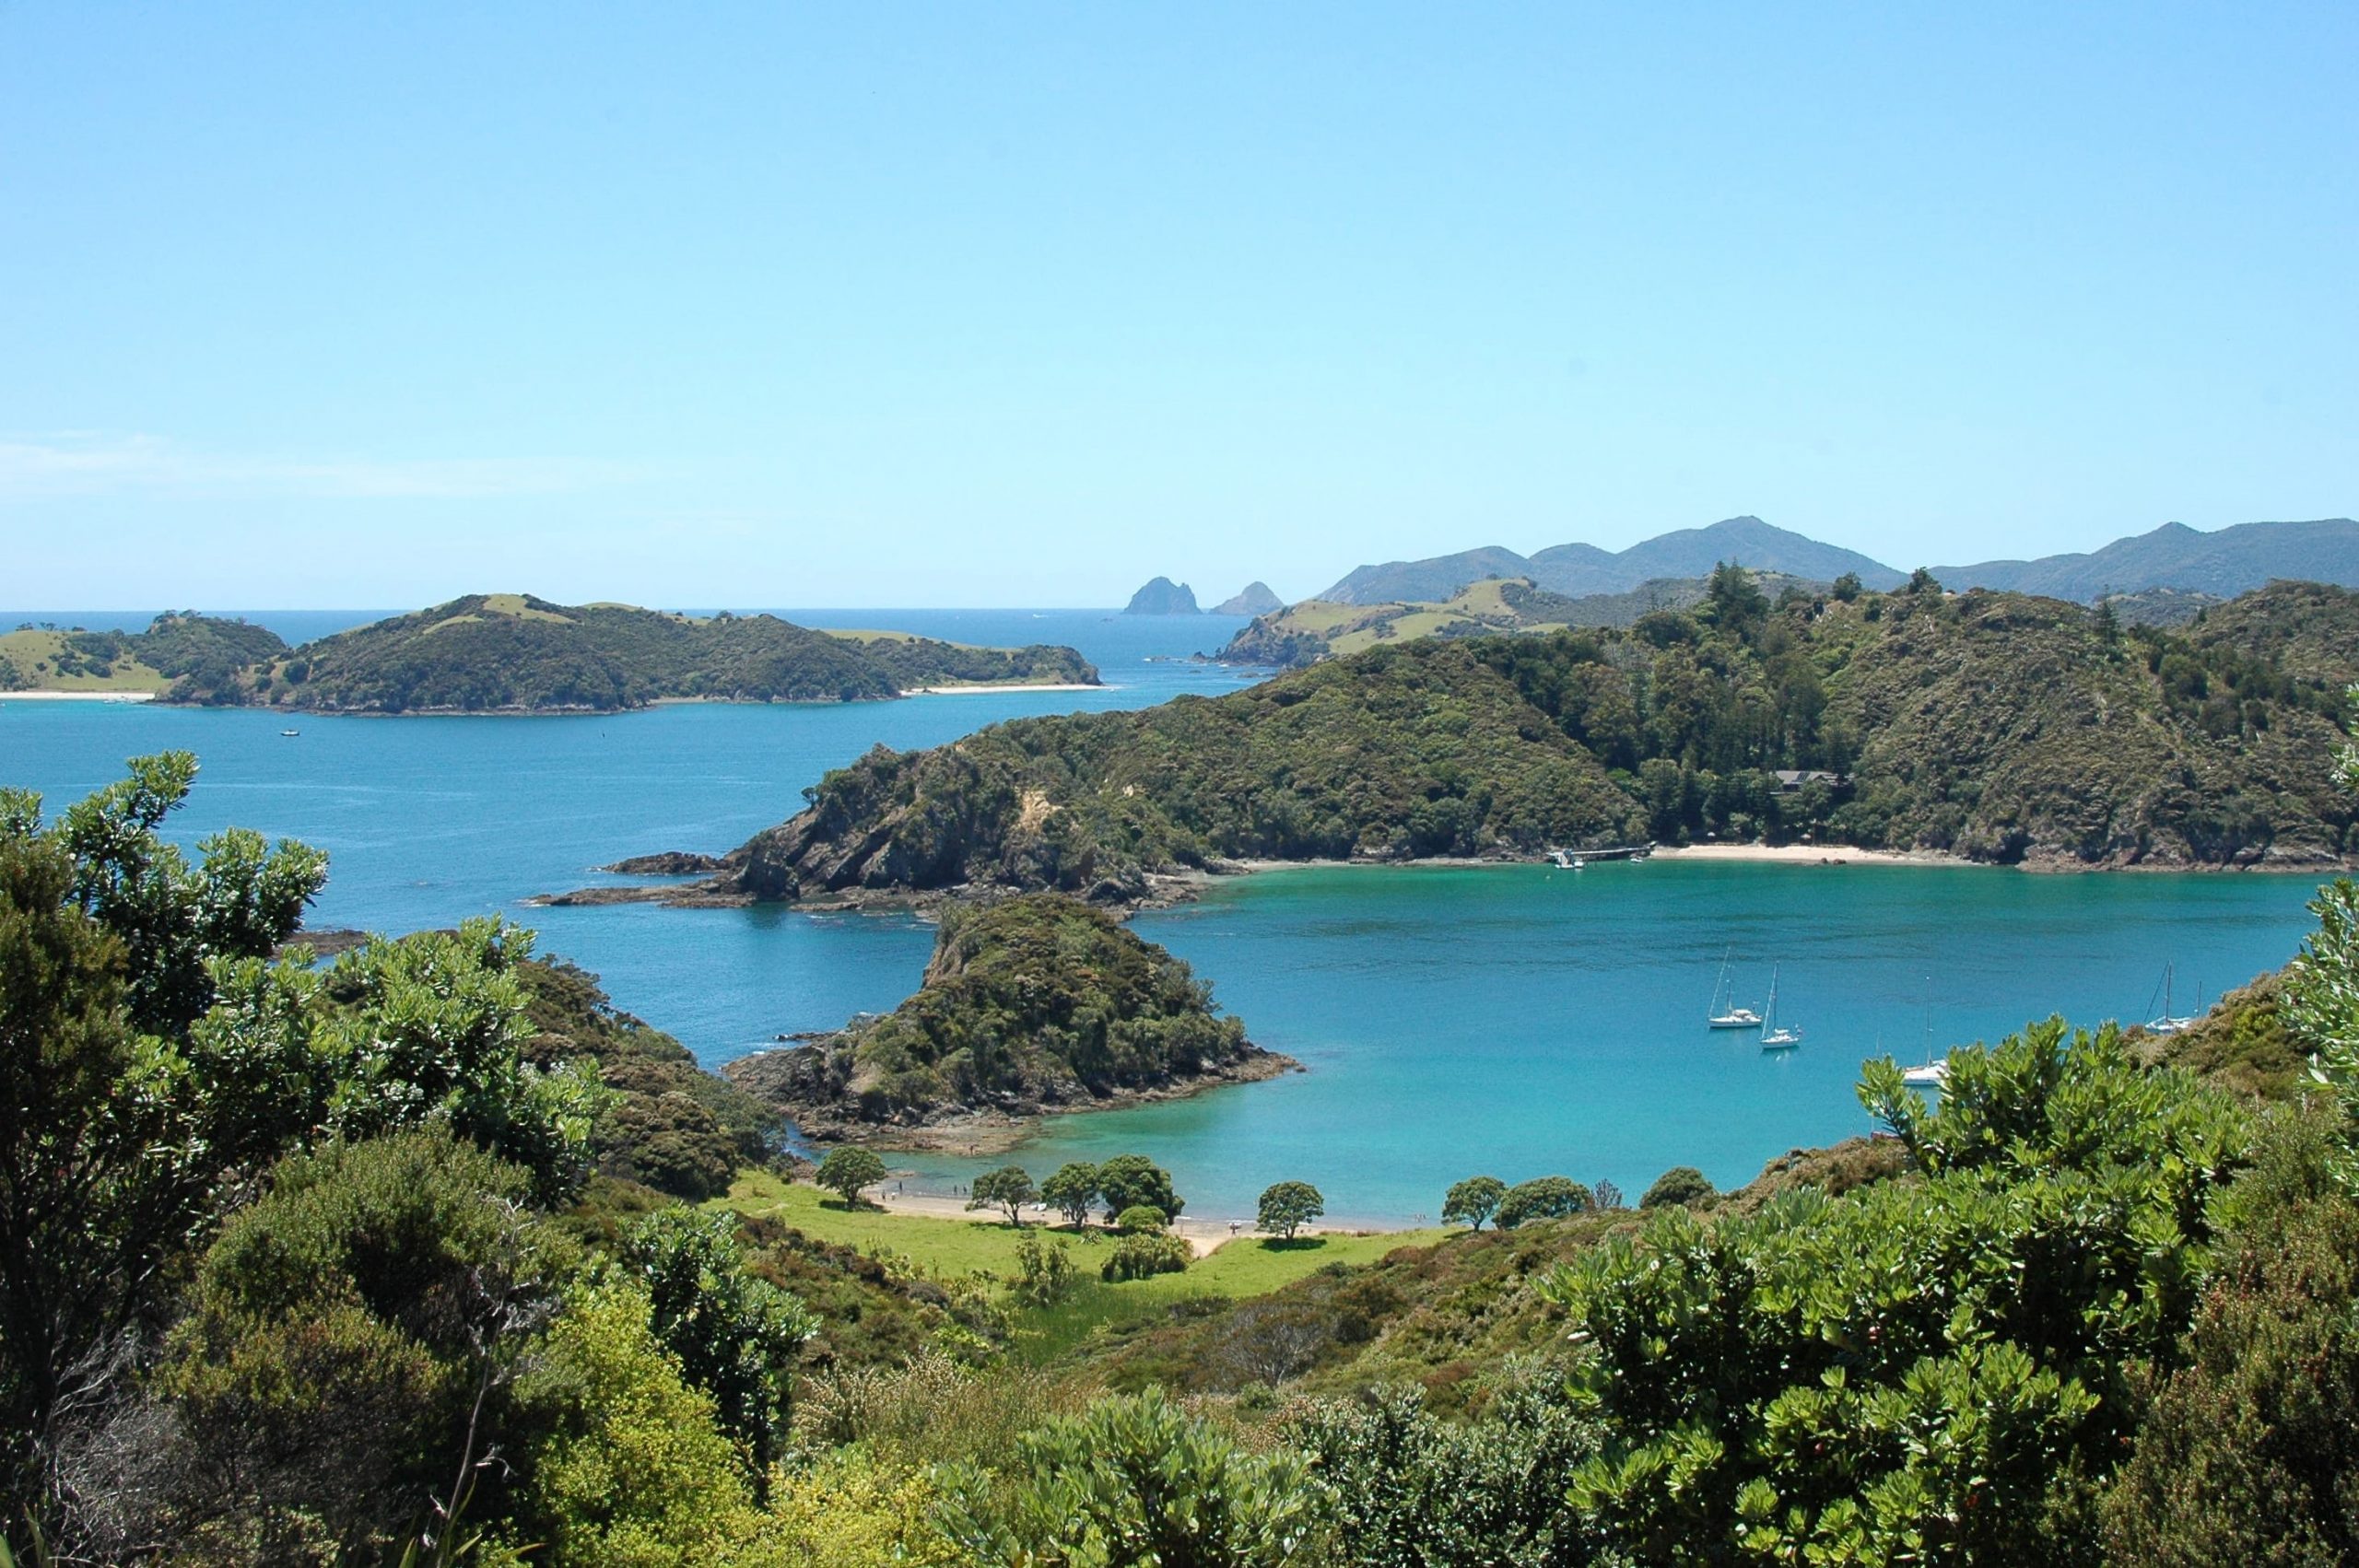 A viewpoint overlooking small tree-covered islands and blue ocean dotted with small sailing boats.